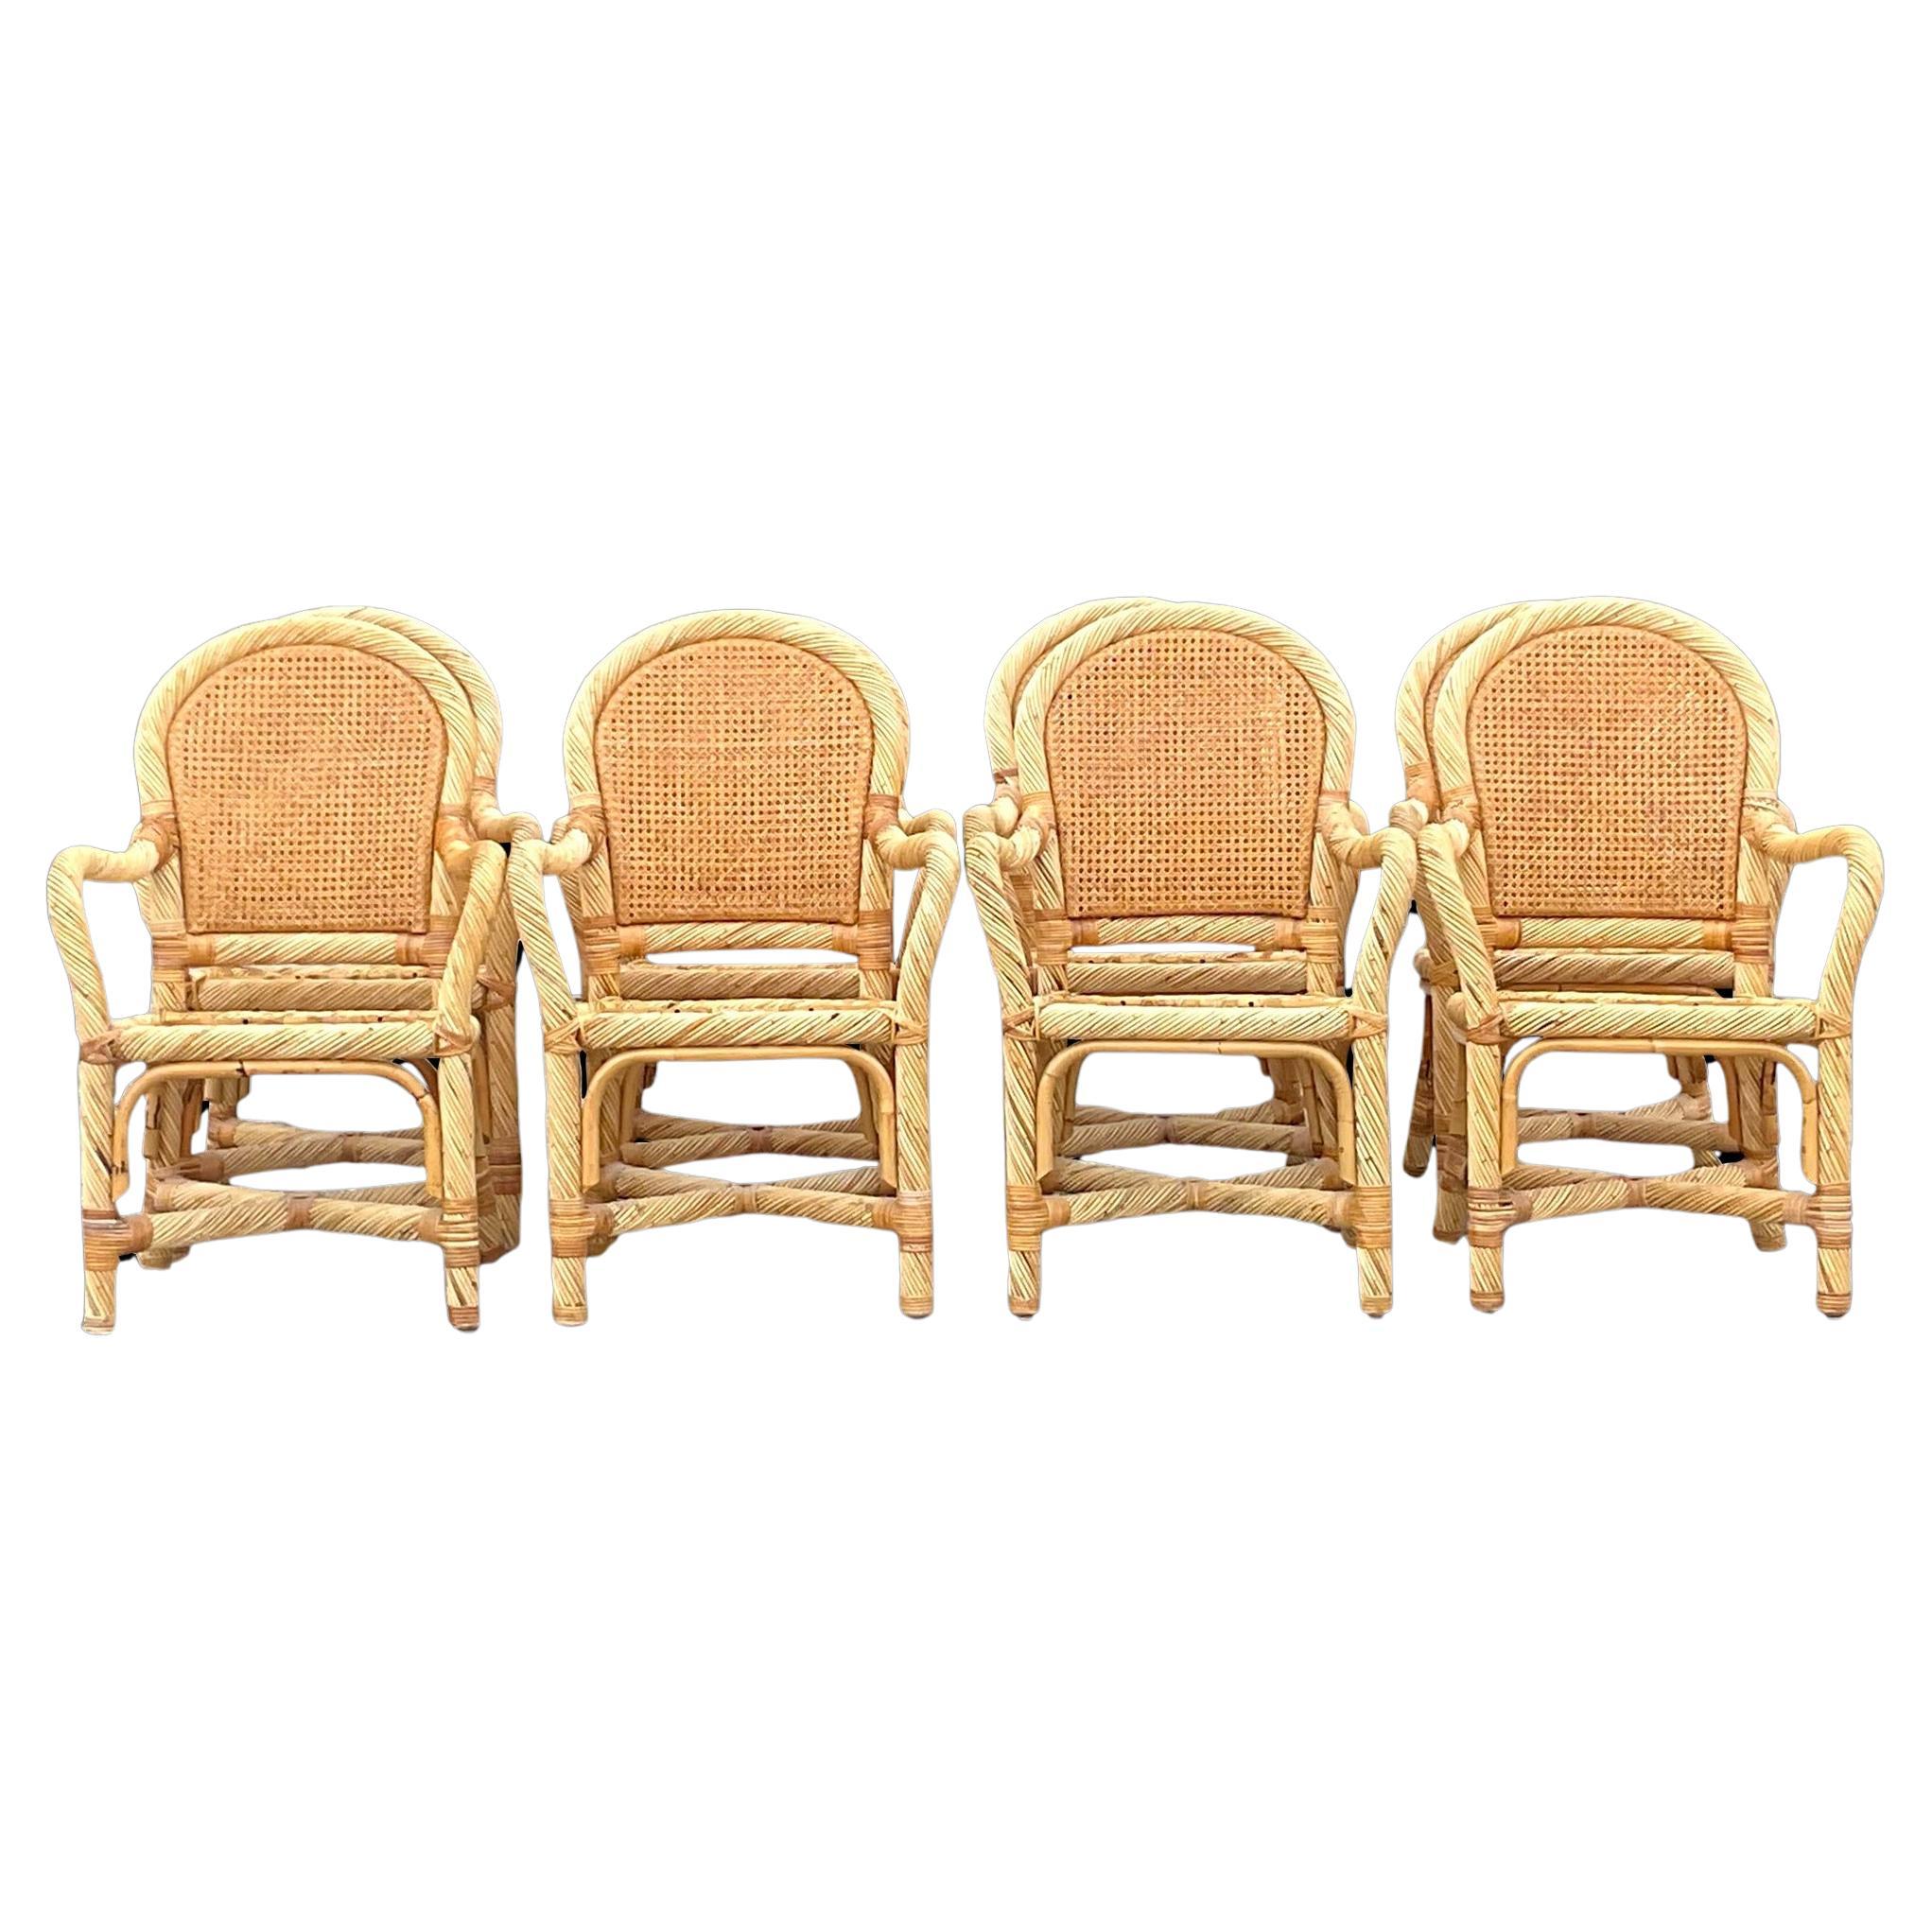 Vintage Coastal Twisted Rattan Dining Chairs - Set of 8 For Sale